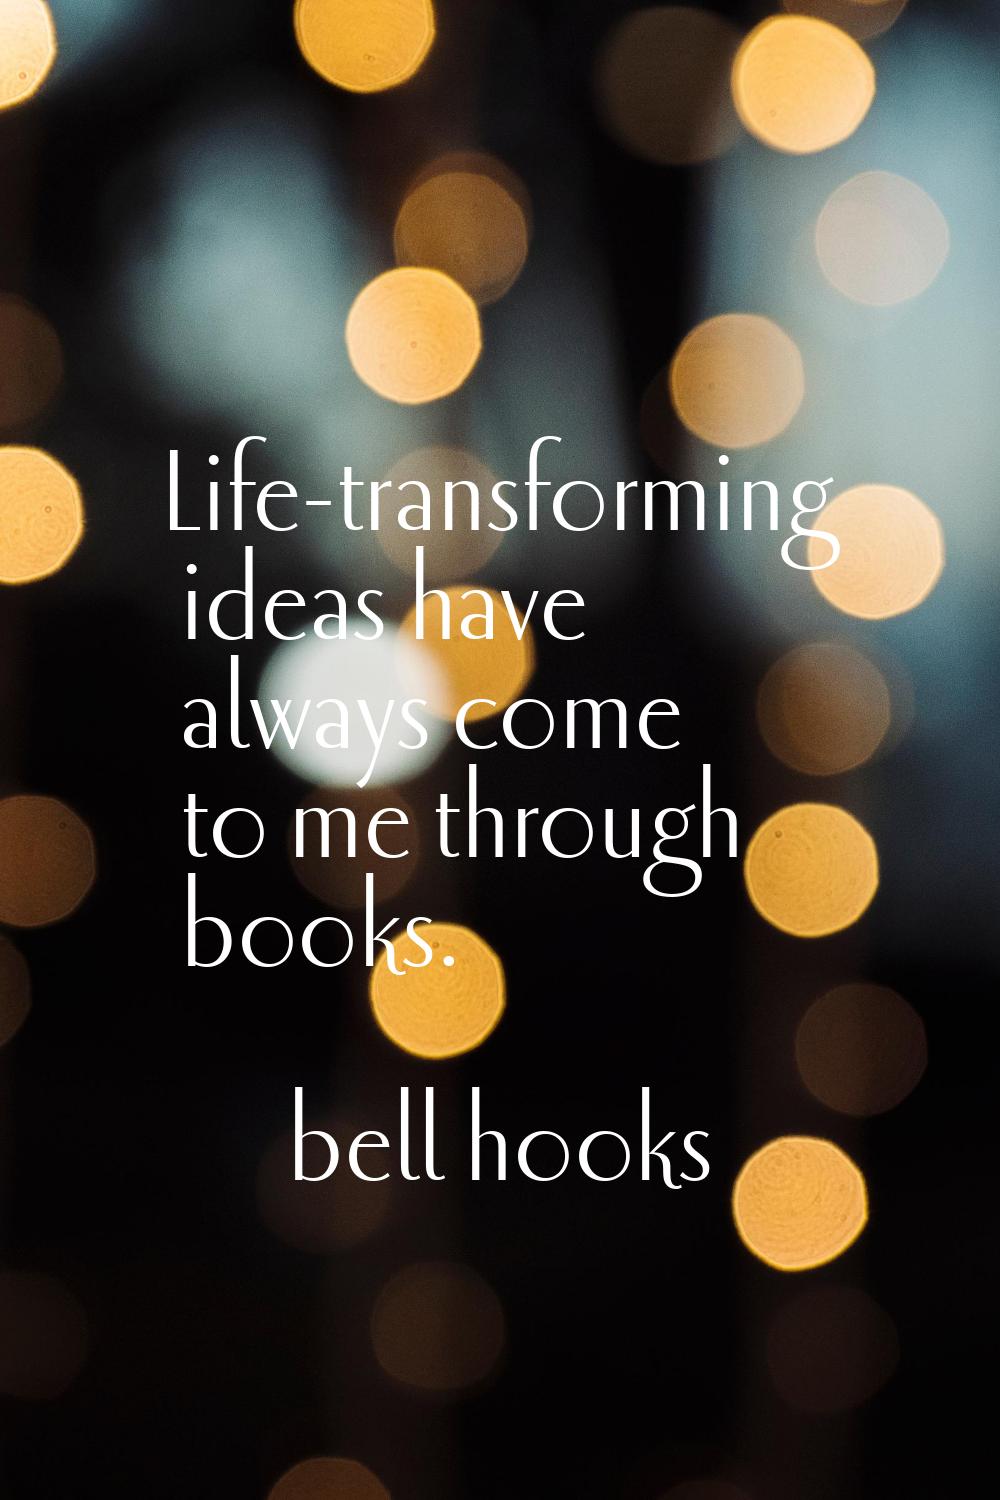 Life-transforming ideas have always come to me through books.